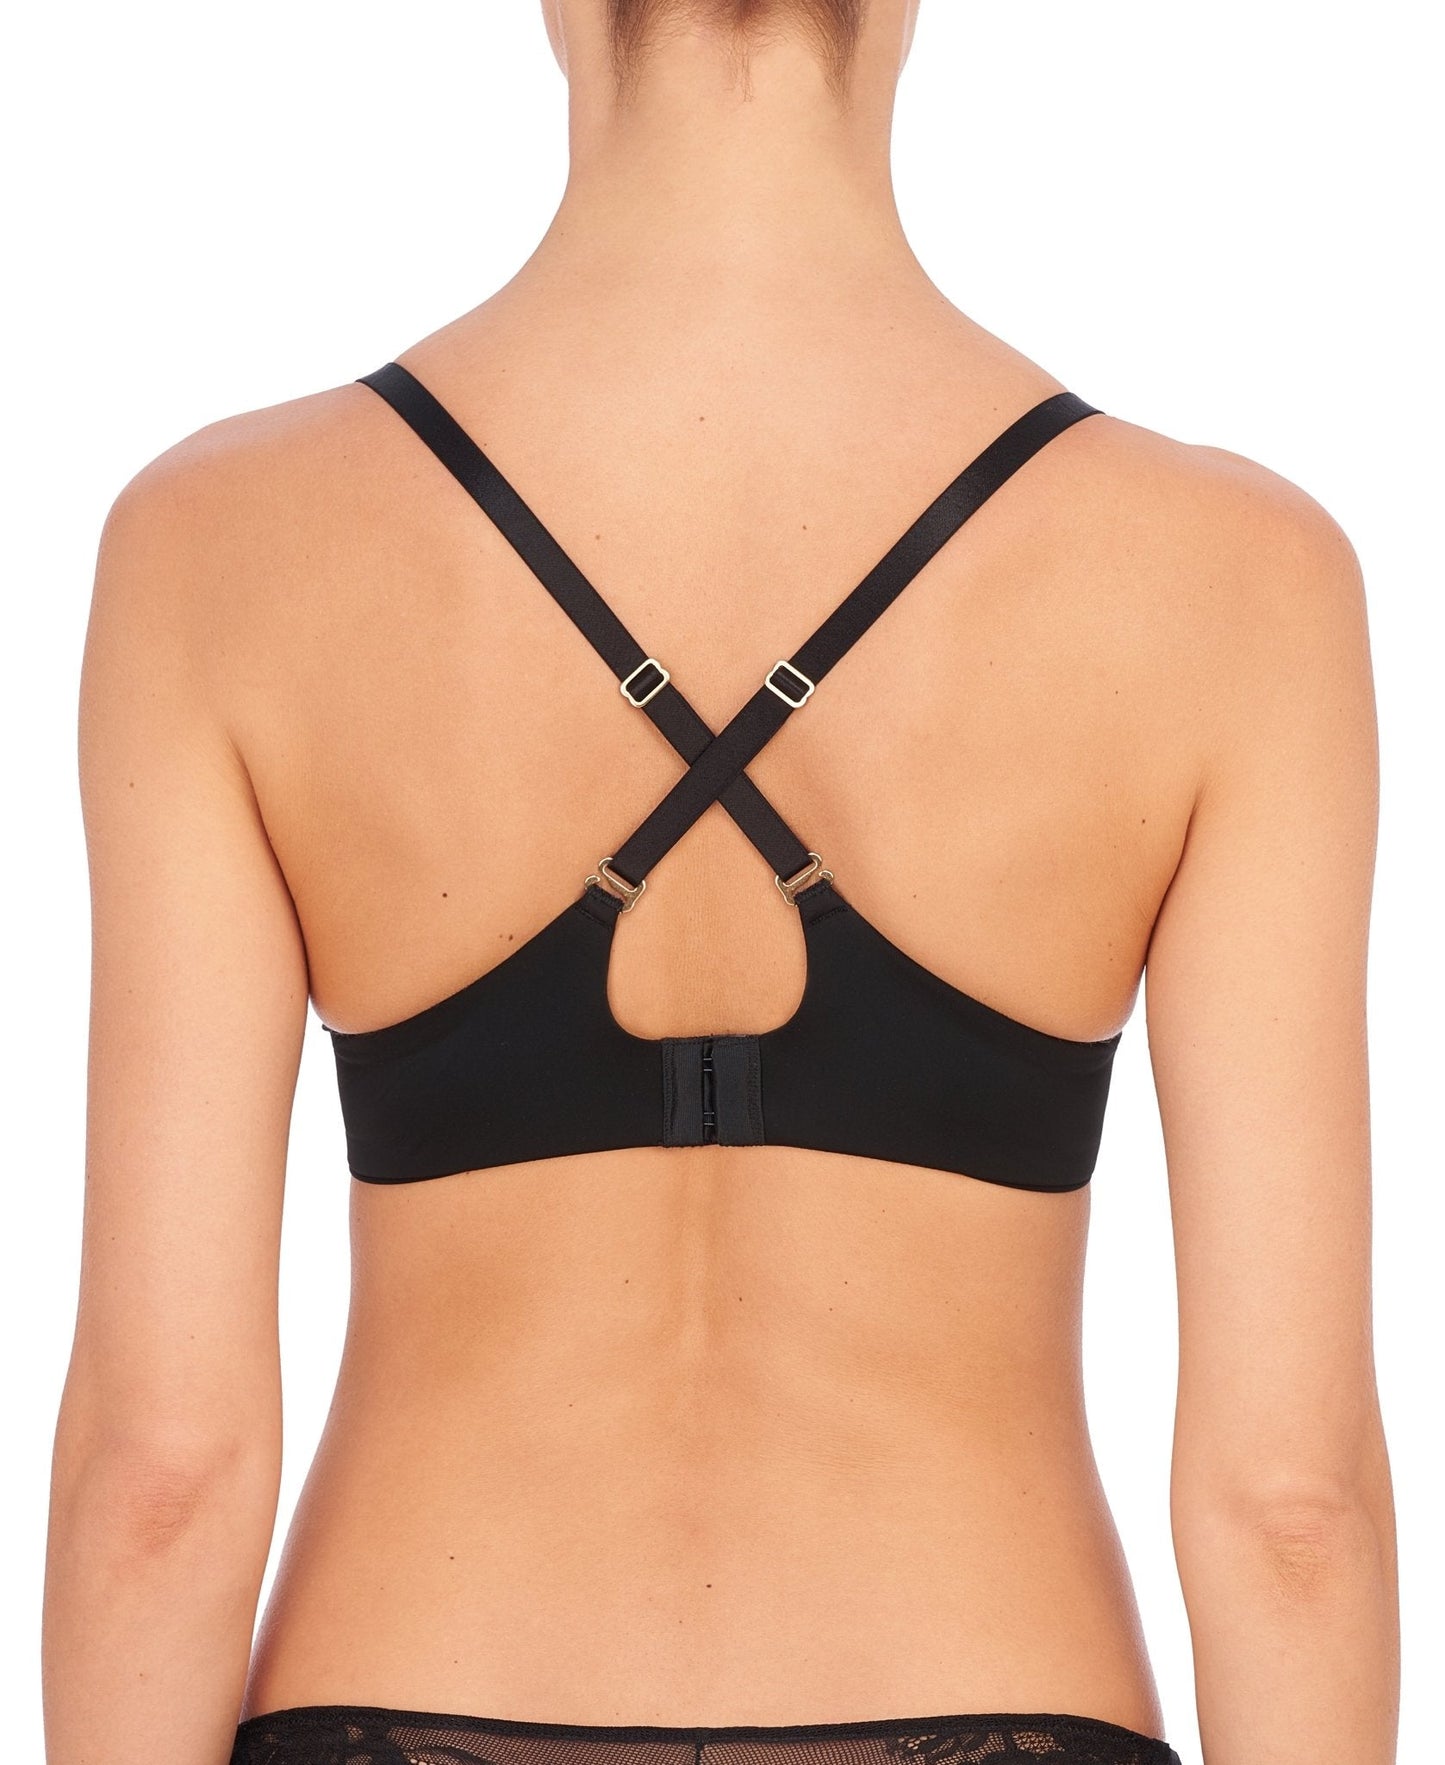 Avail Full Bust Convertible Plunge Bra - Pinned Up Bra Lounge